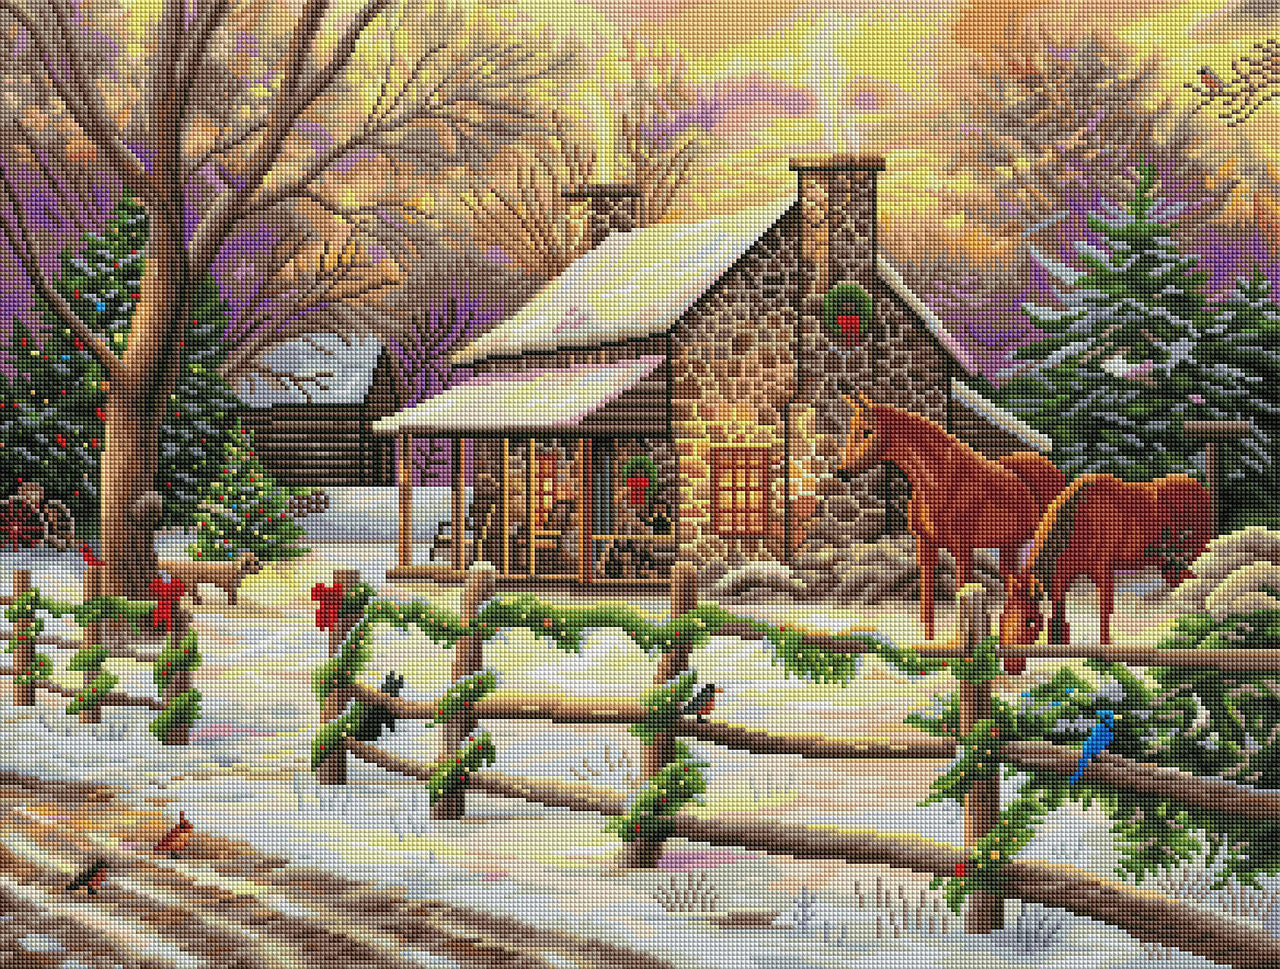 Diamond Painting Marianne's Winter Hideaway 29" x 22" (74cm x 56cm) / Square With 57 Colors Including 4 ABs / 64,532